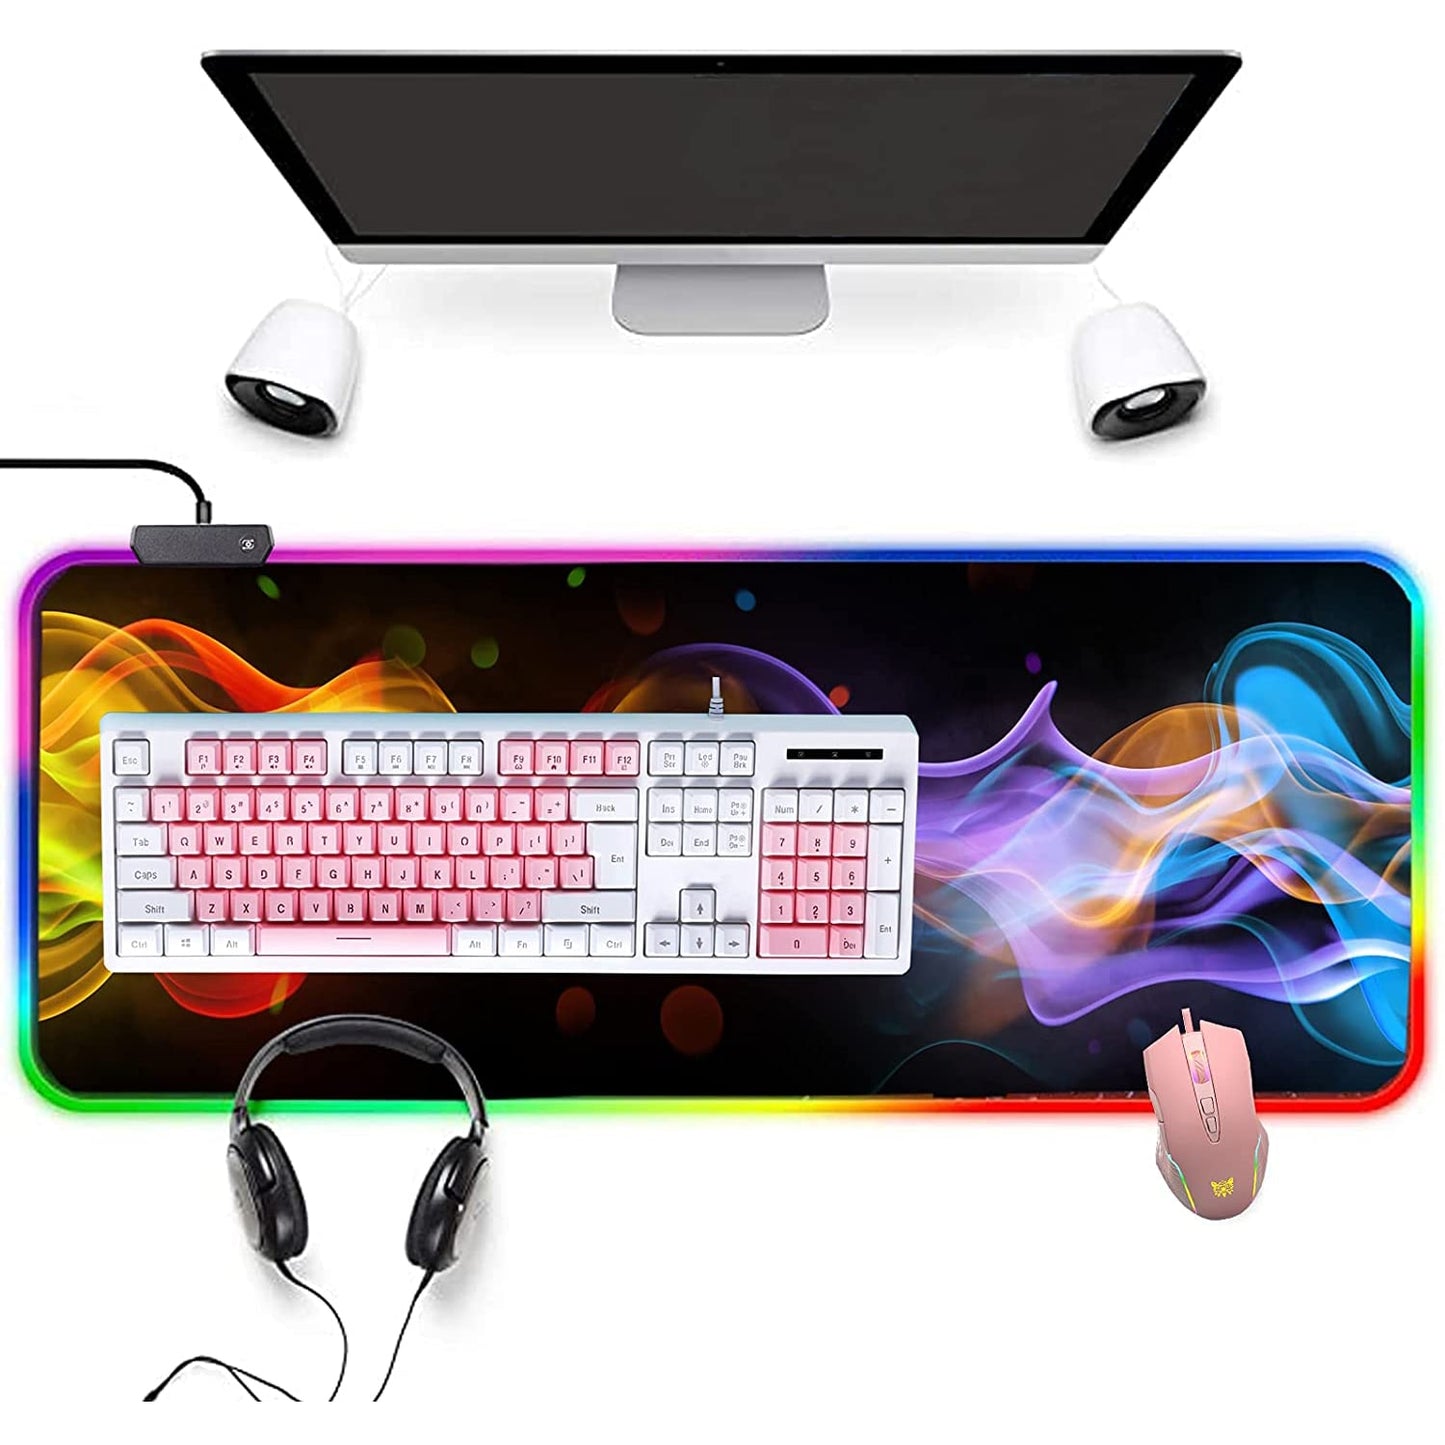 Yellow Flame RGB Gaming Mouse Pad – 80×30 CM